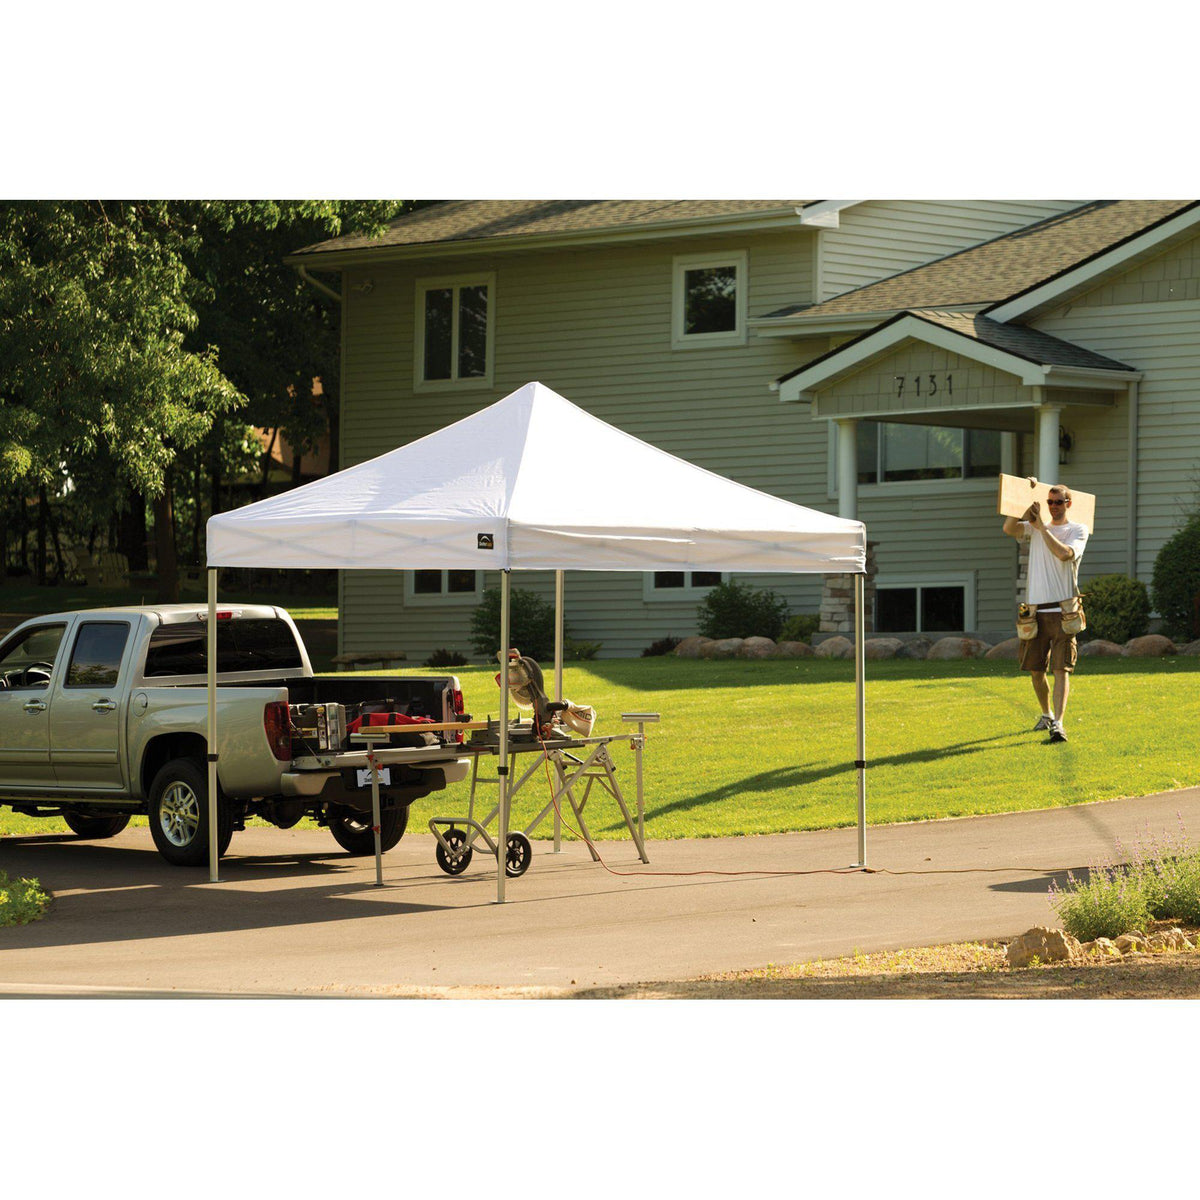 ShelterLogic Alumi-Max Pop-up Canopy with Roller Bag, White, 10 x 10 ft.